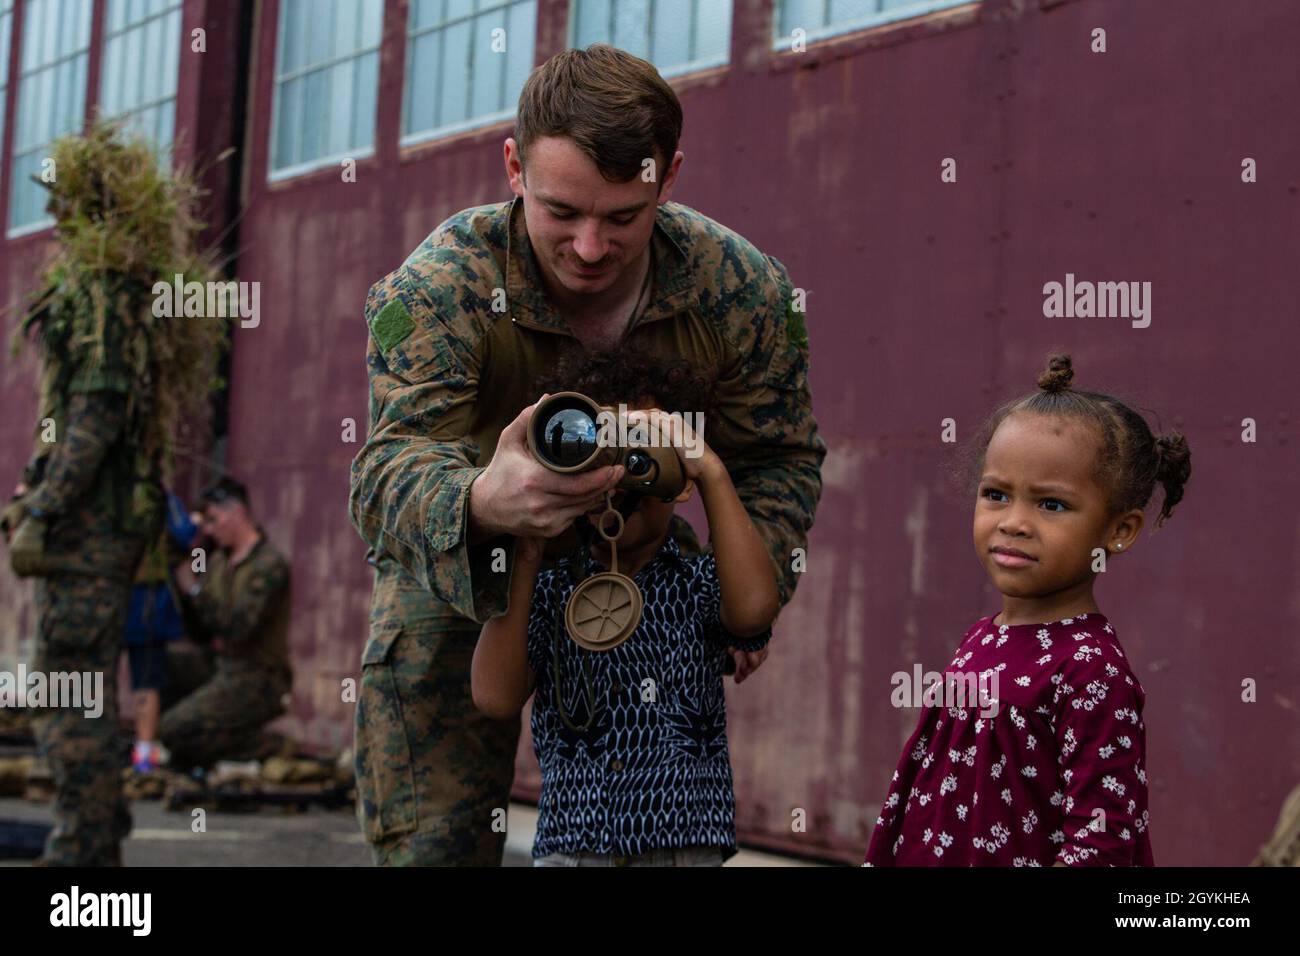 A Reconnaissance Marine with the 31st Marine Expeditionary Unit’s Maritime Raid Force showcases his gear for a child during a community interaction, tactical demonstration event in Kapolei, HI, Jan. 19, 2020. The 31st MEU, the Marine Corps’ only continuously forward-deployed MEU, provides a flexible and lethal force ready to perform a wide range of military operations as the premier crisis response force in the Indo-Pacific region. (Official U.S. Marine Corps photo by Cpl. Isaac Cantrell) Stock Photo